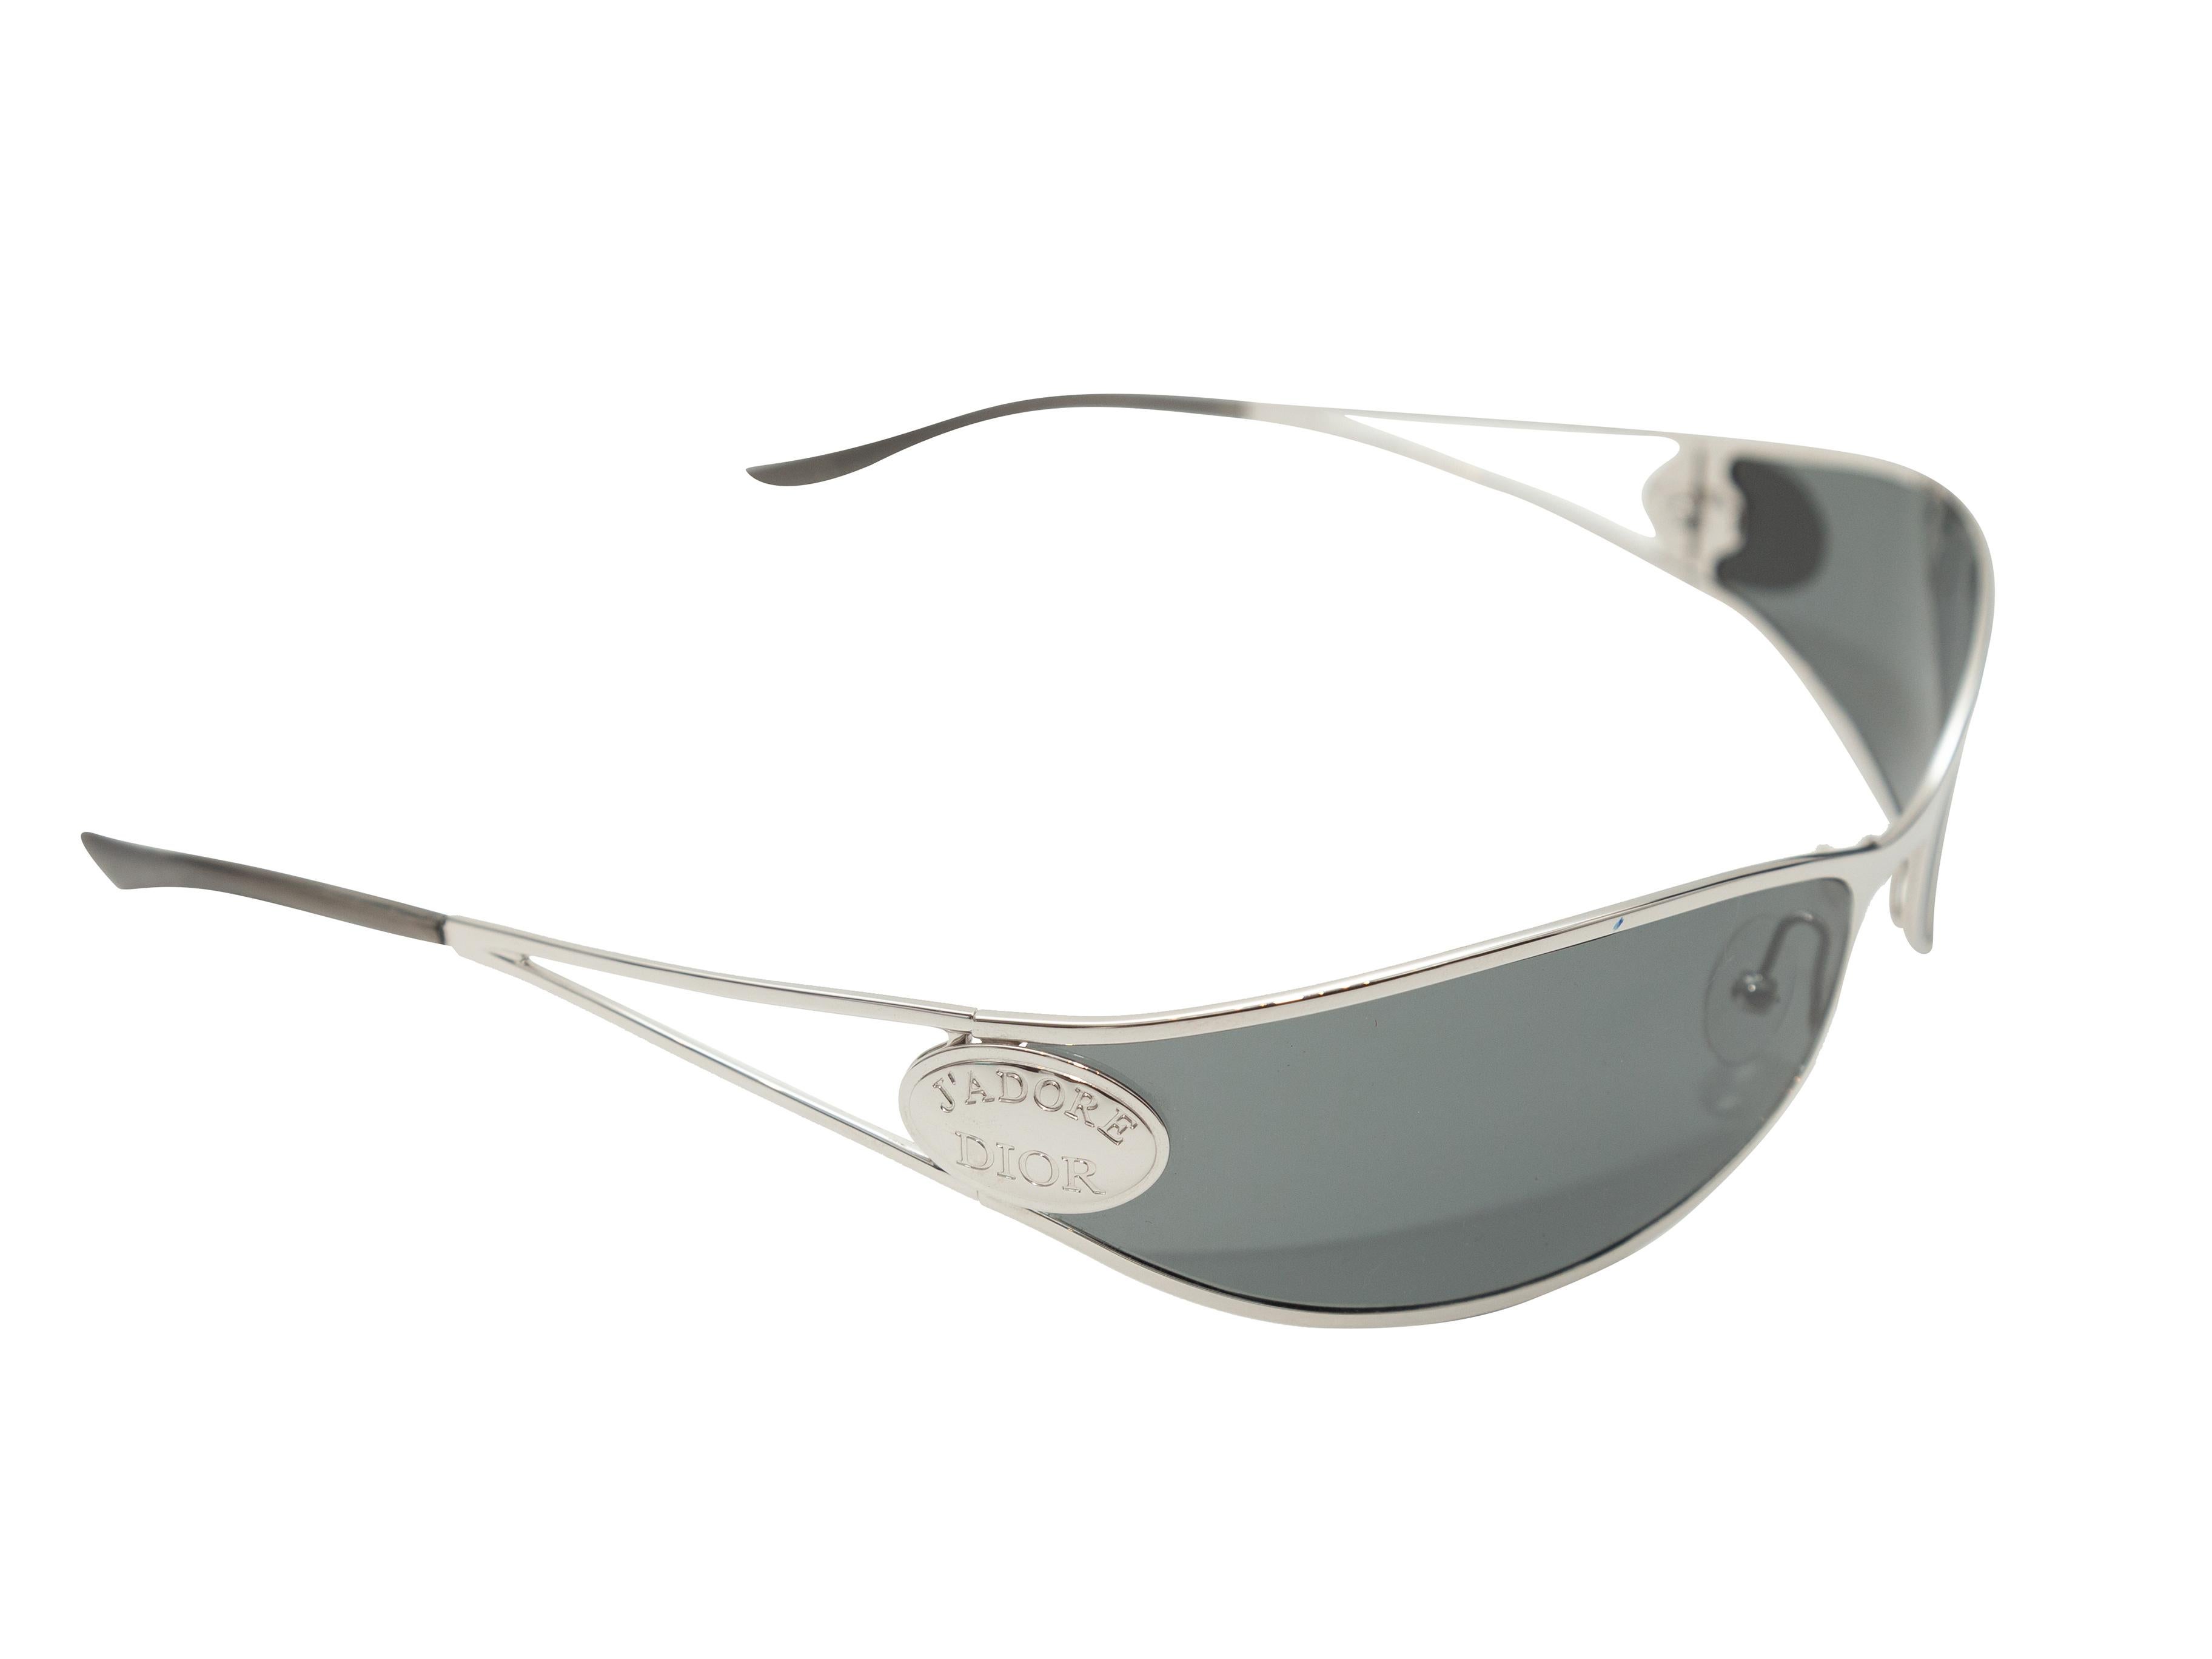 Product Details: Vintage silver metal wrap sunglasses by Christian Dior. Grey tinted lenses. 1.25